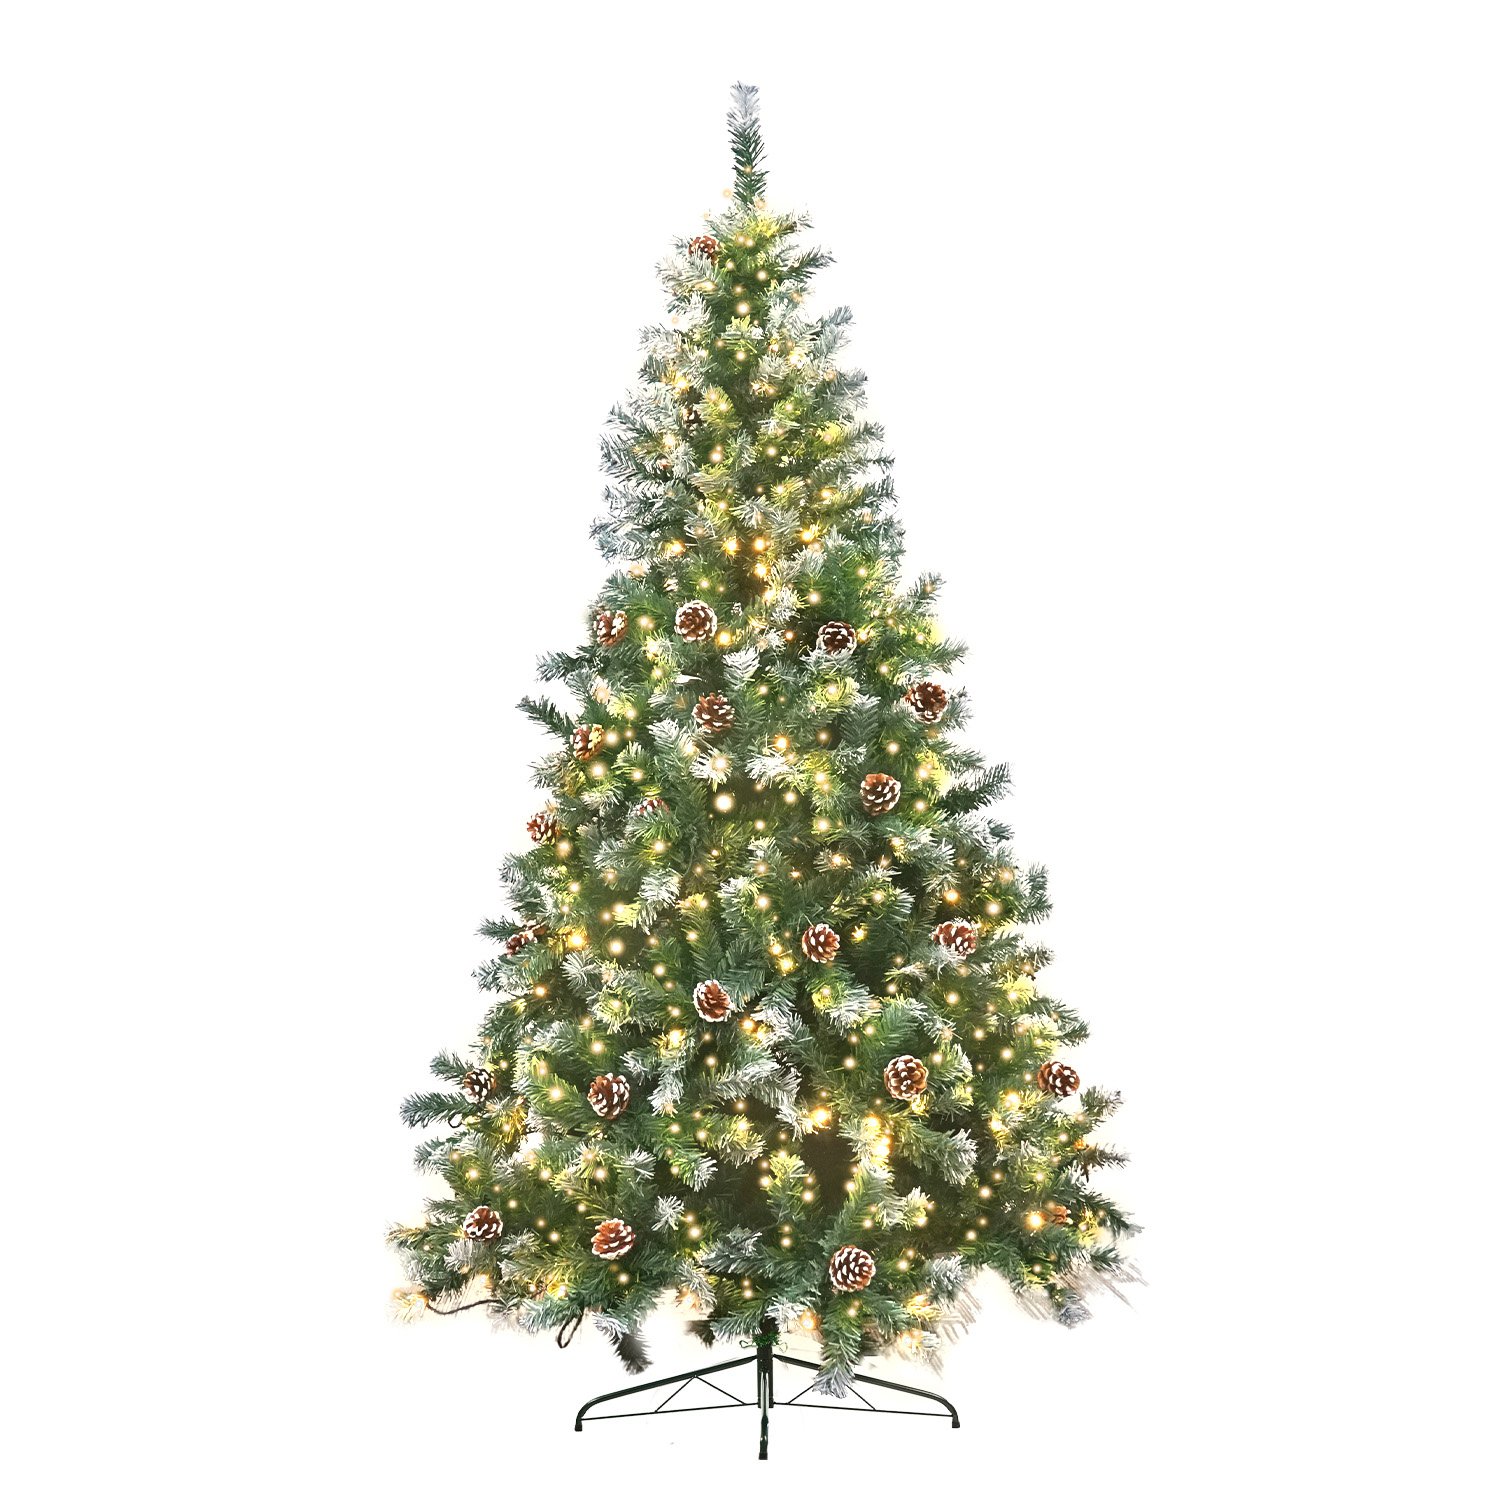 Christabelle 1.2m Pre Lit LED Christmas Tree with Pine Cones 2